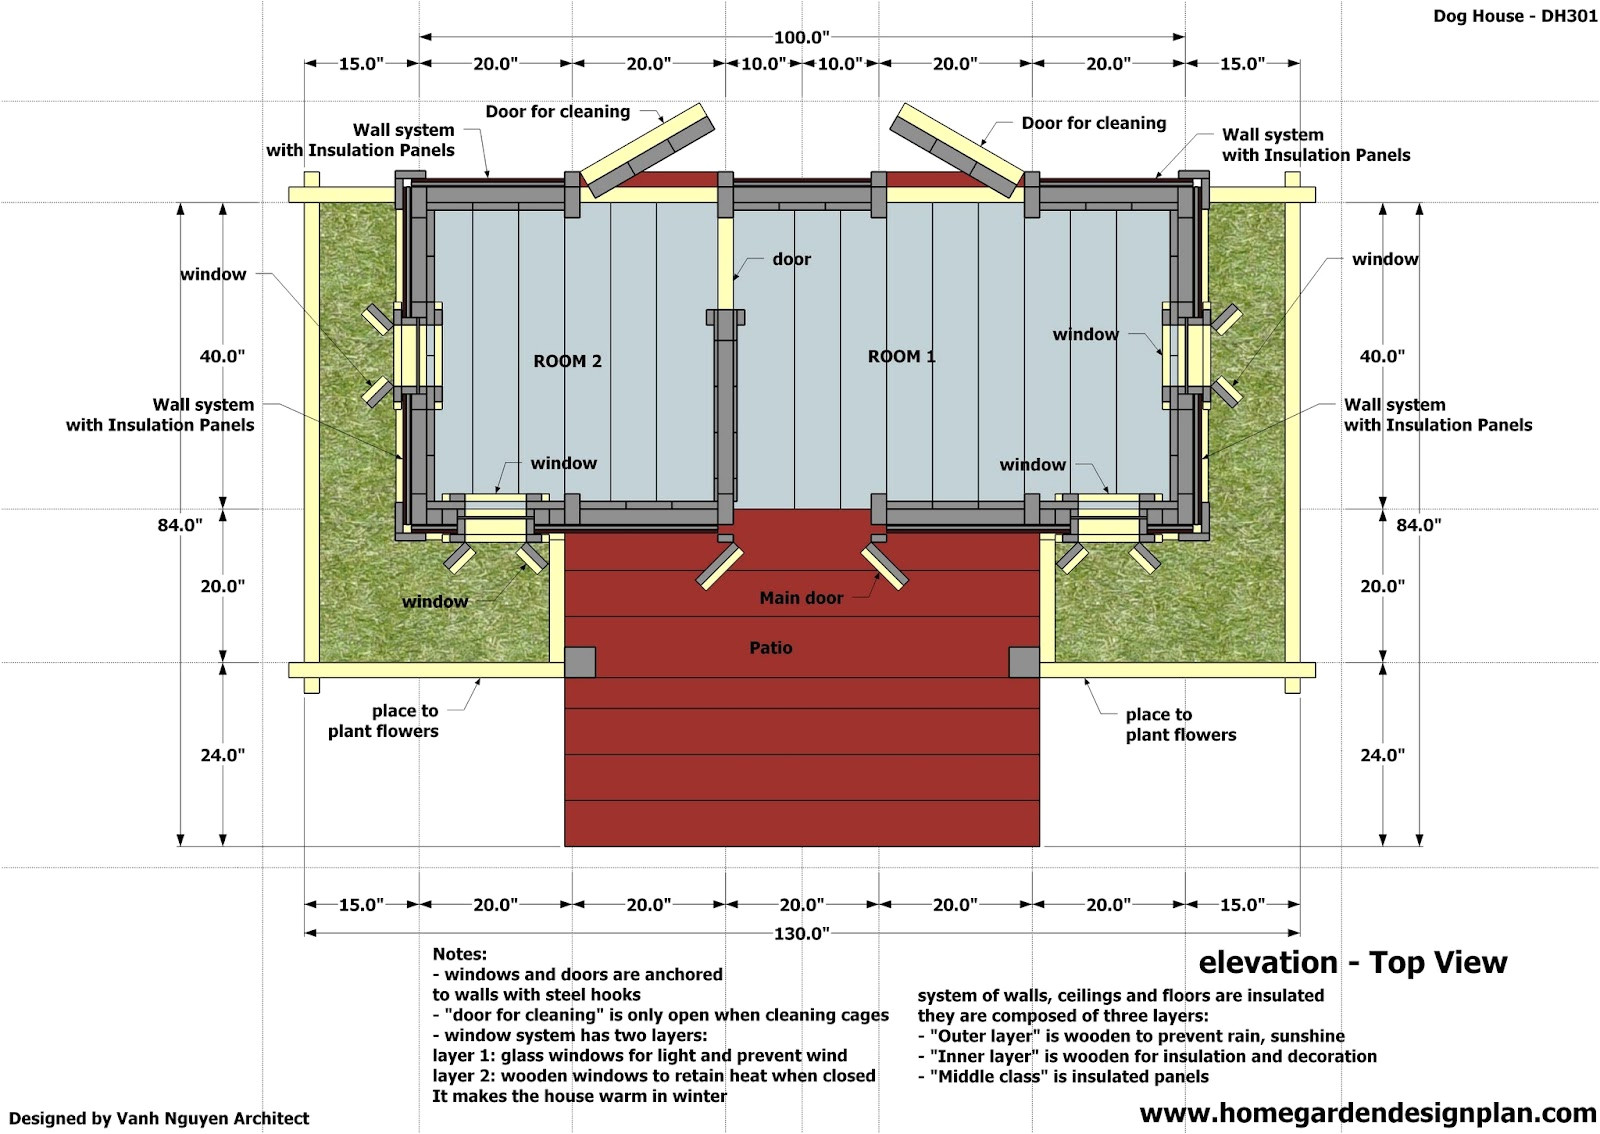 dh301 insulated dog house plans